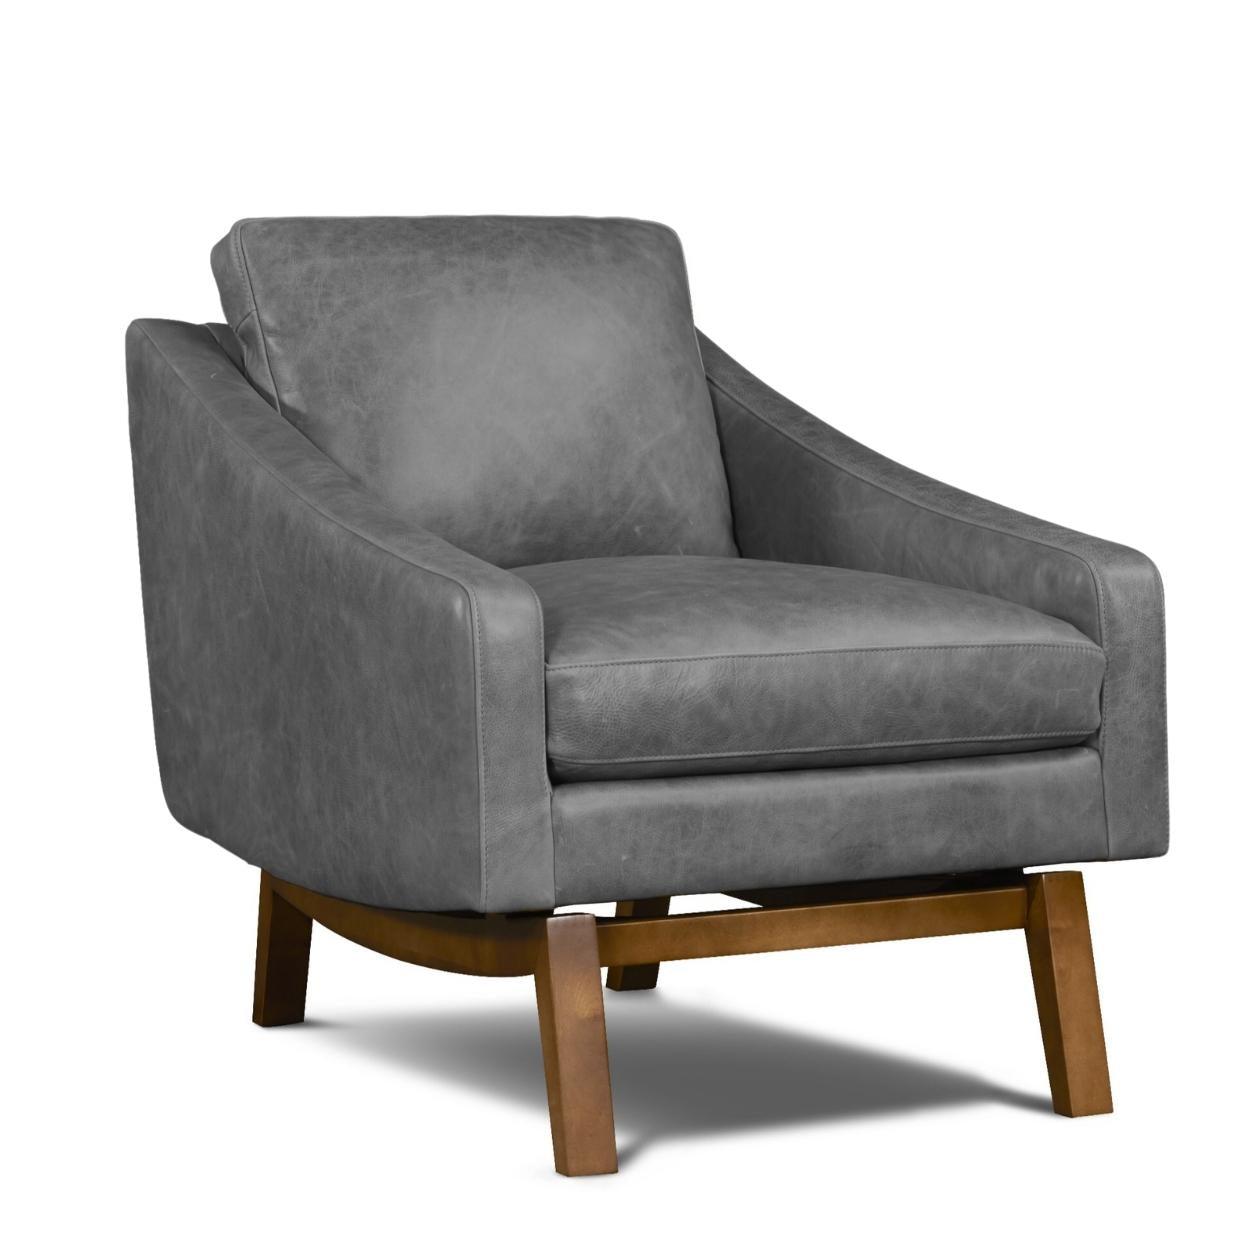 Midcentury Full Aniline Pull Up Leather Accent Chair Dutch Made to Order - Uptown Sebastian